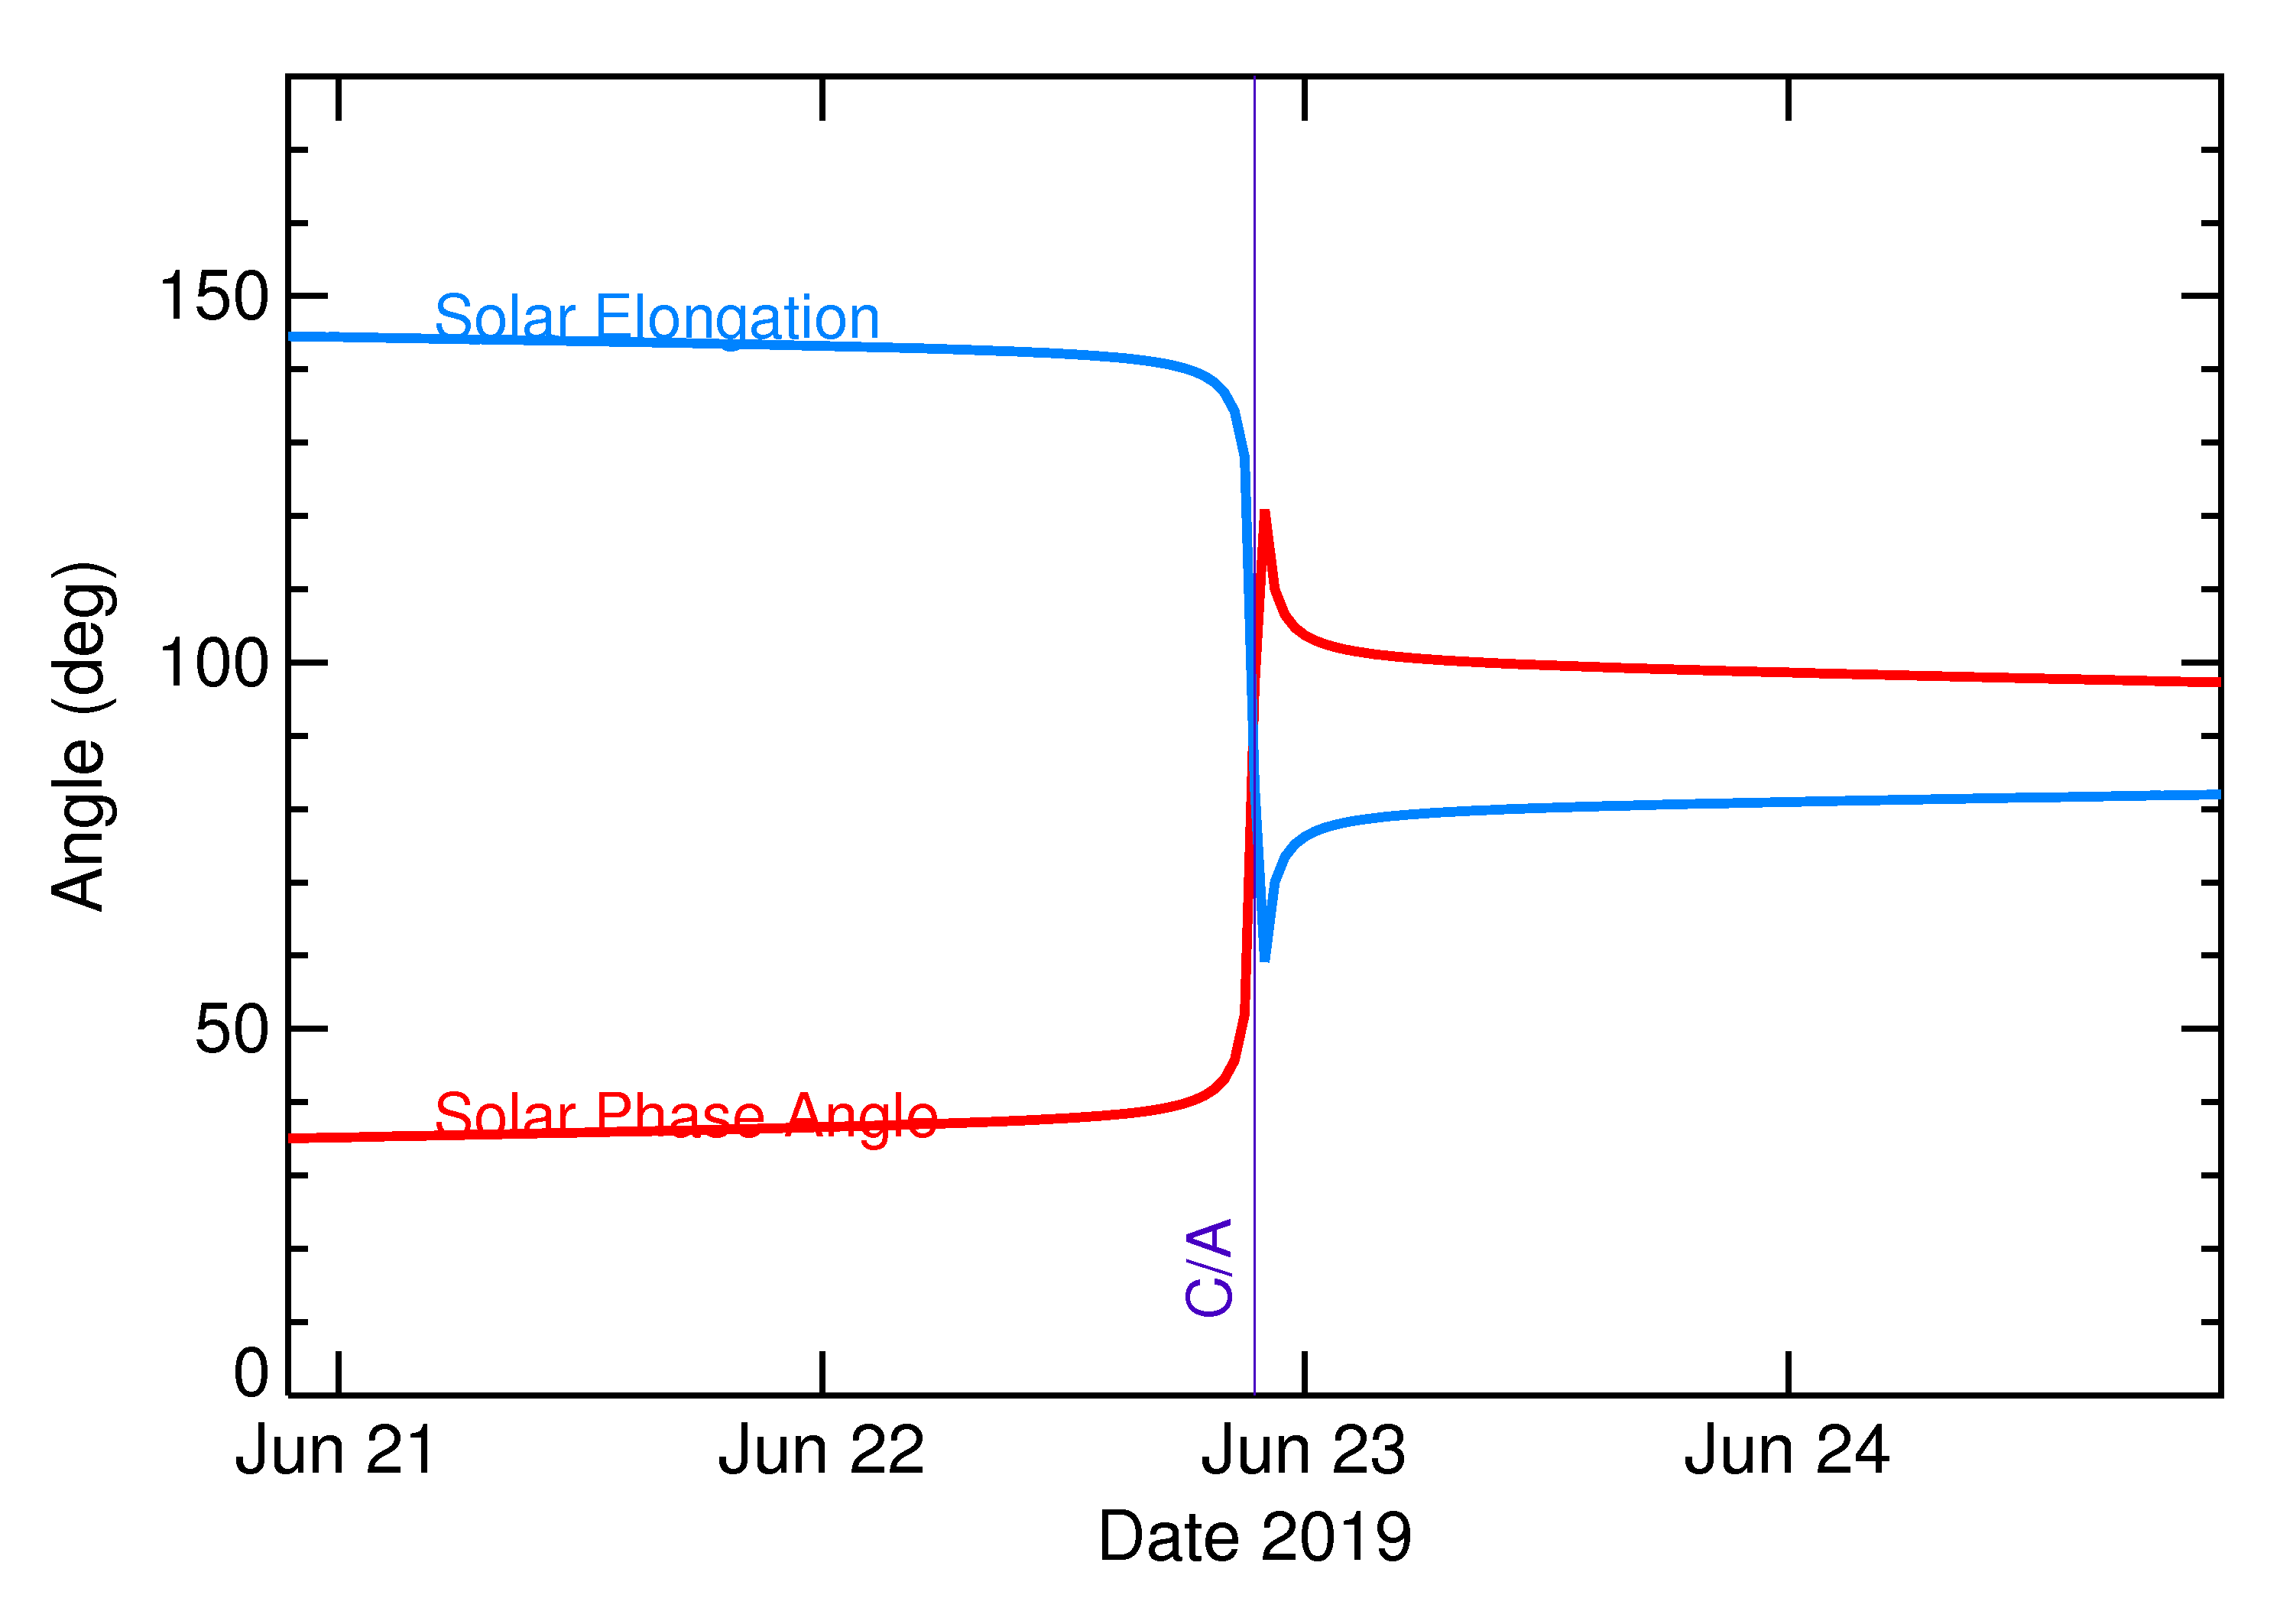 Solar Elongation and Solar Phase Angle of 2019 MO in the days around closest approach